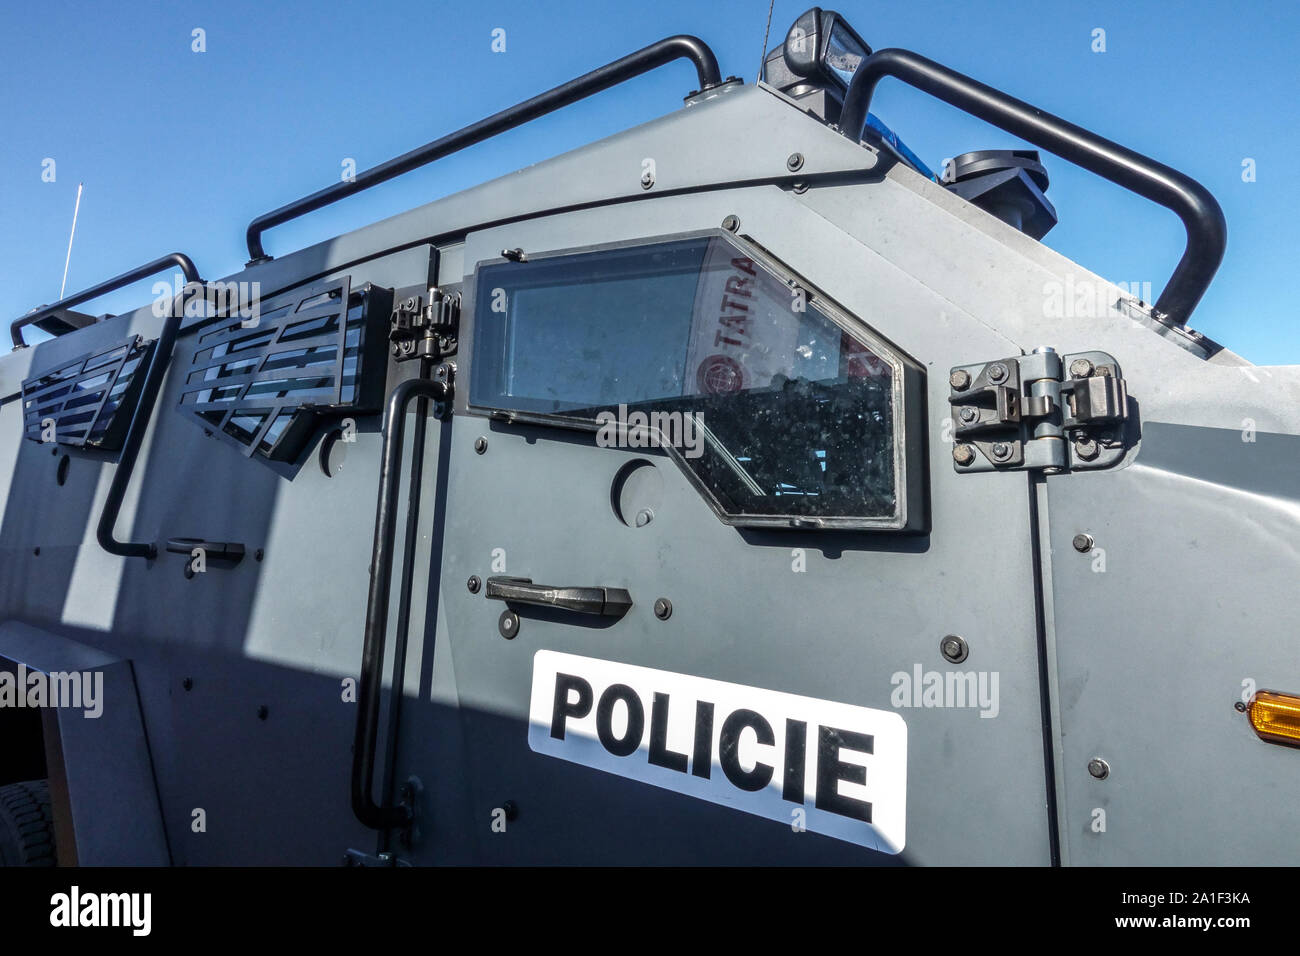 Tatra T-Kat armored vehicle for Czech Police Stock Photo